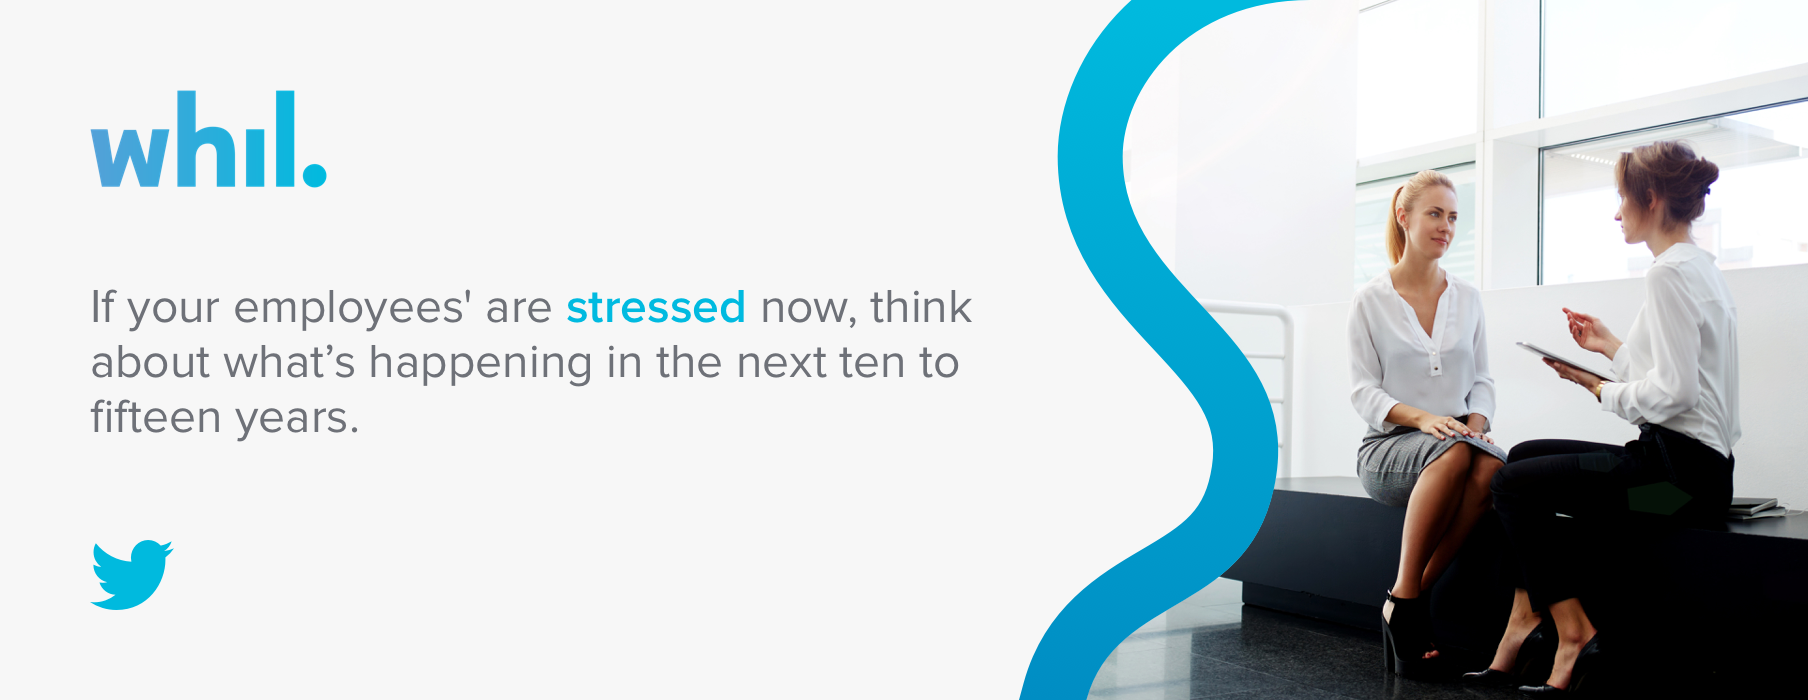 If your employees' are stressed now, think about what’s happening in the next ten to fifteen years.